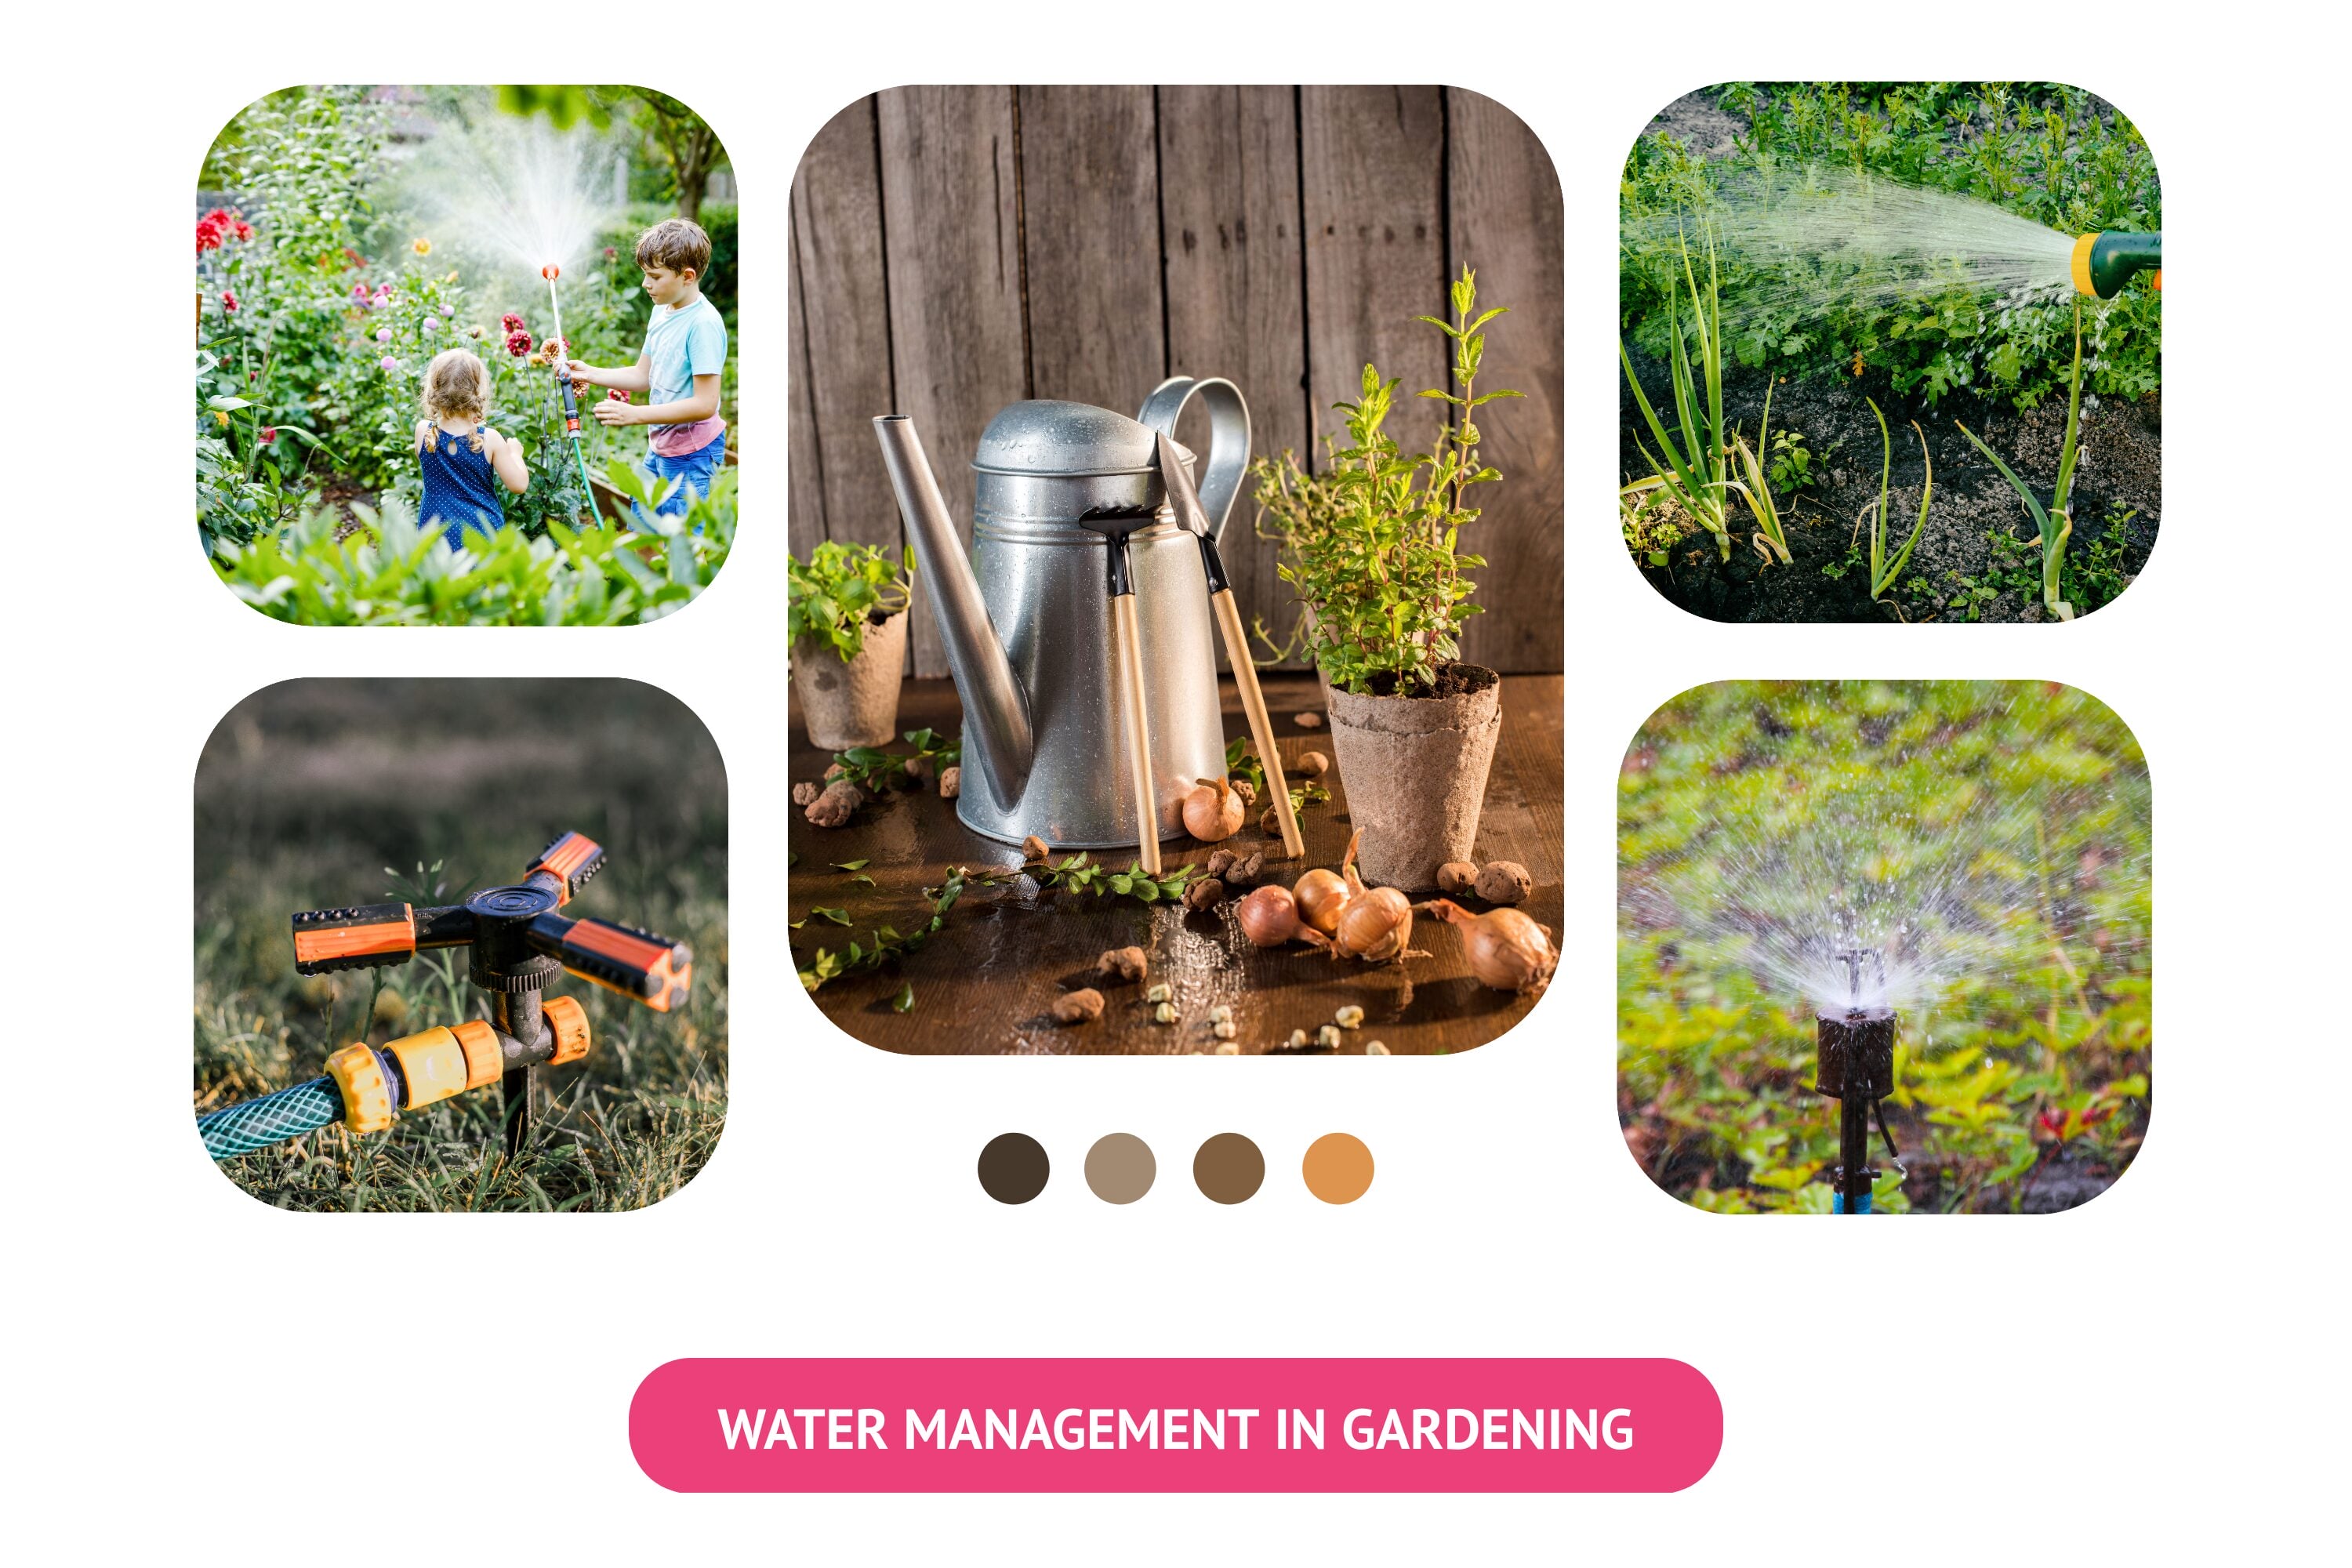 Managing water in off-grid gardening is crucial for successful cultivation.